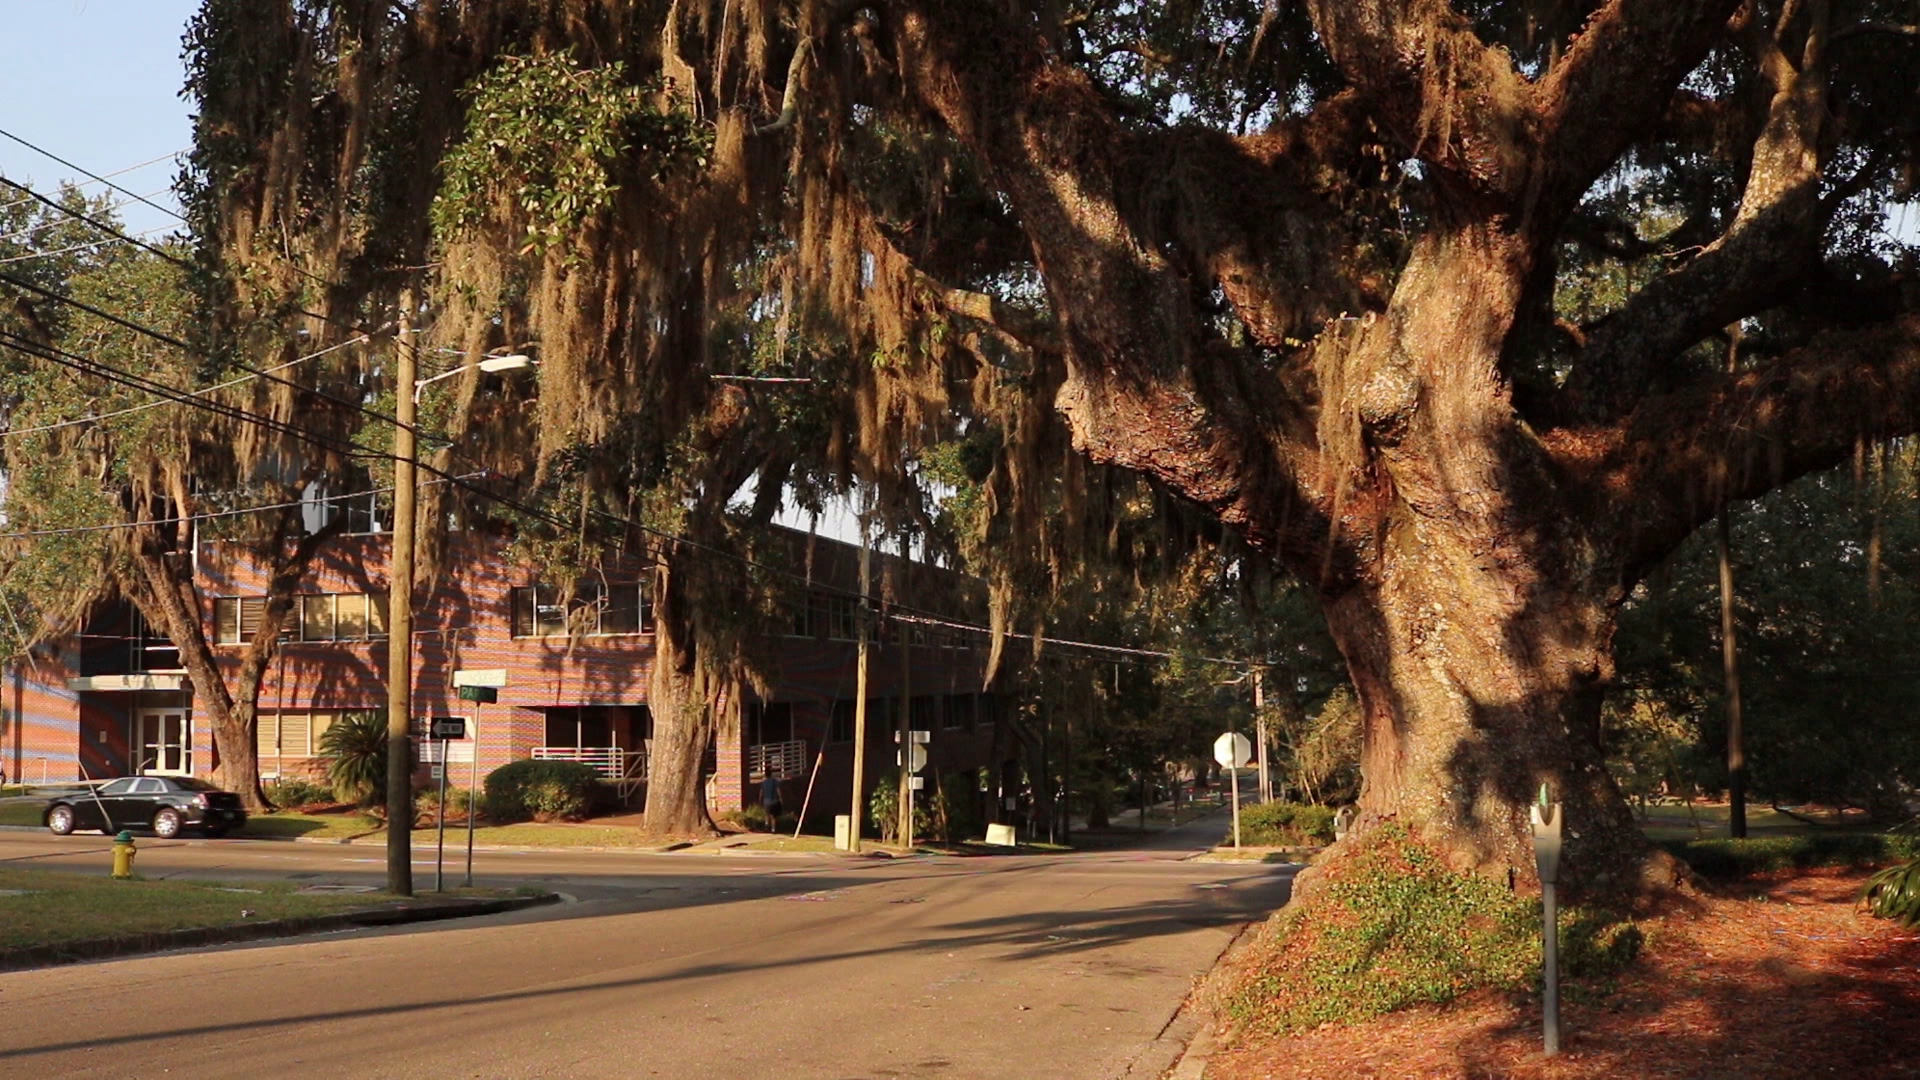 Live Oaks in Tallahassee Part 2|The Urban Forest